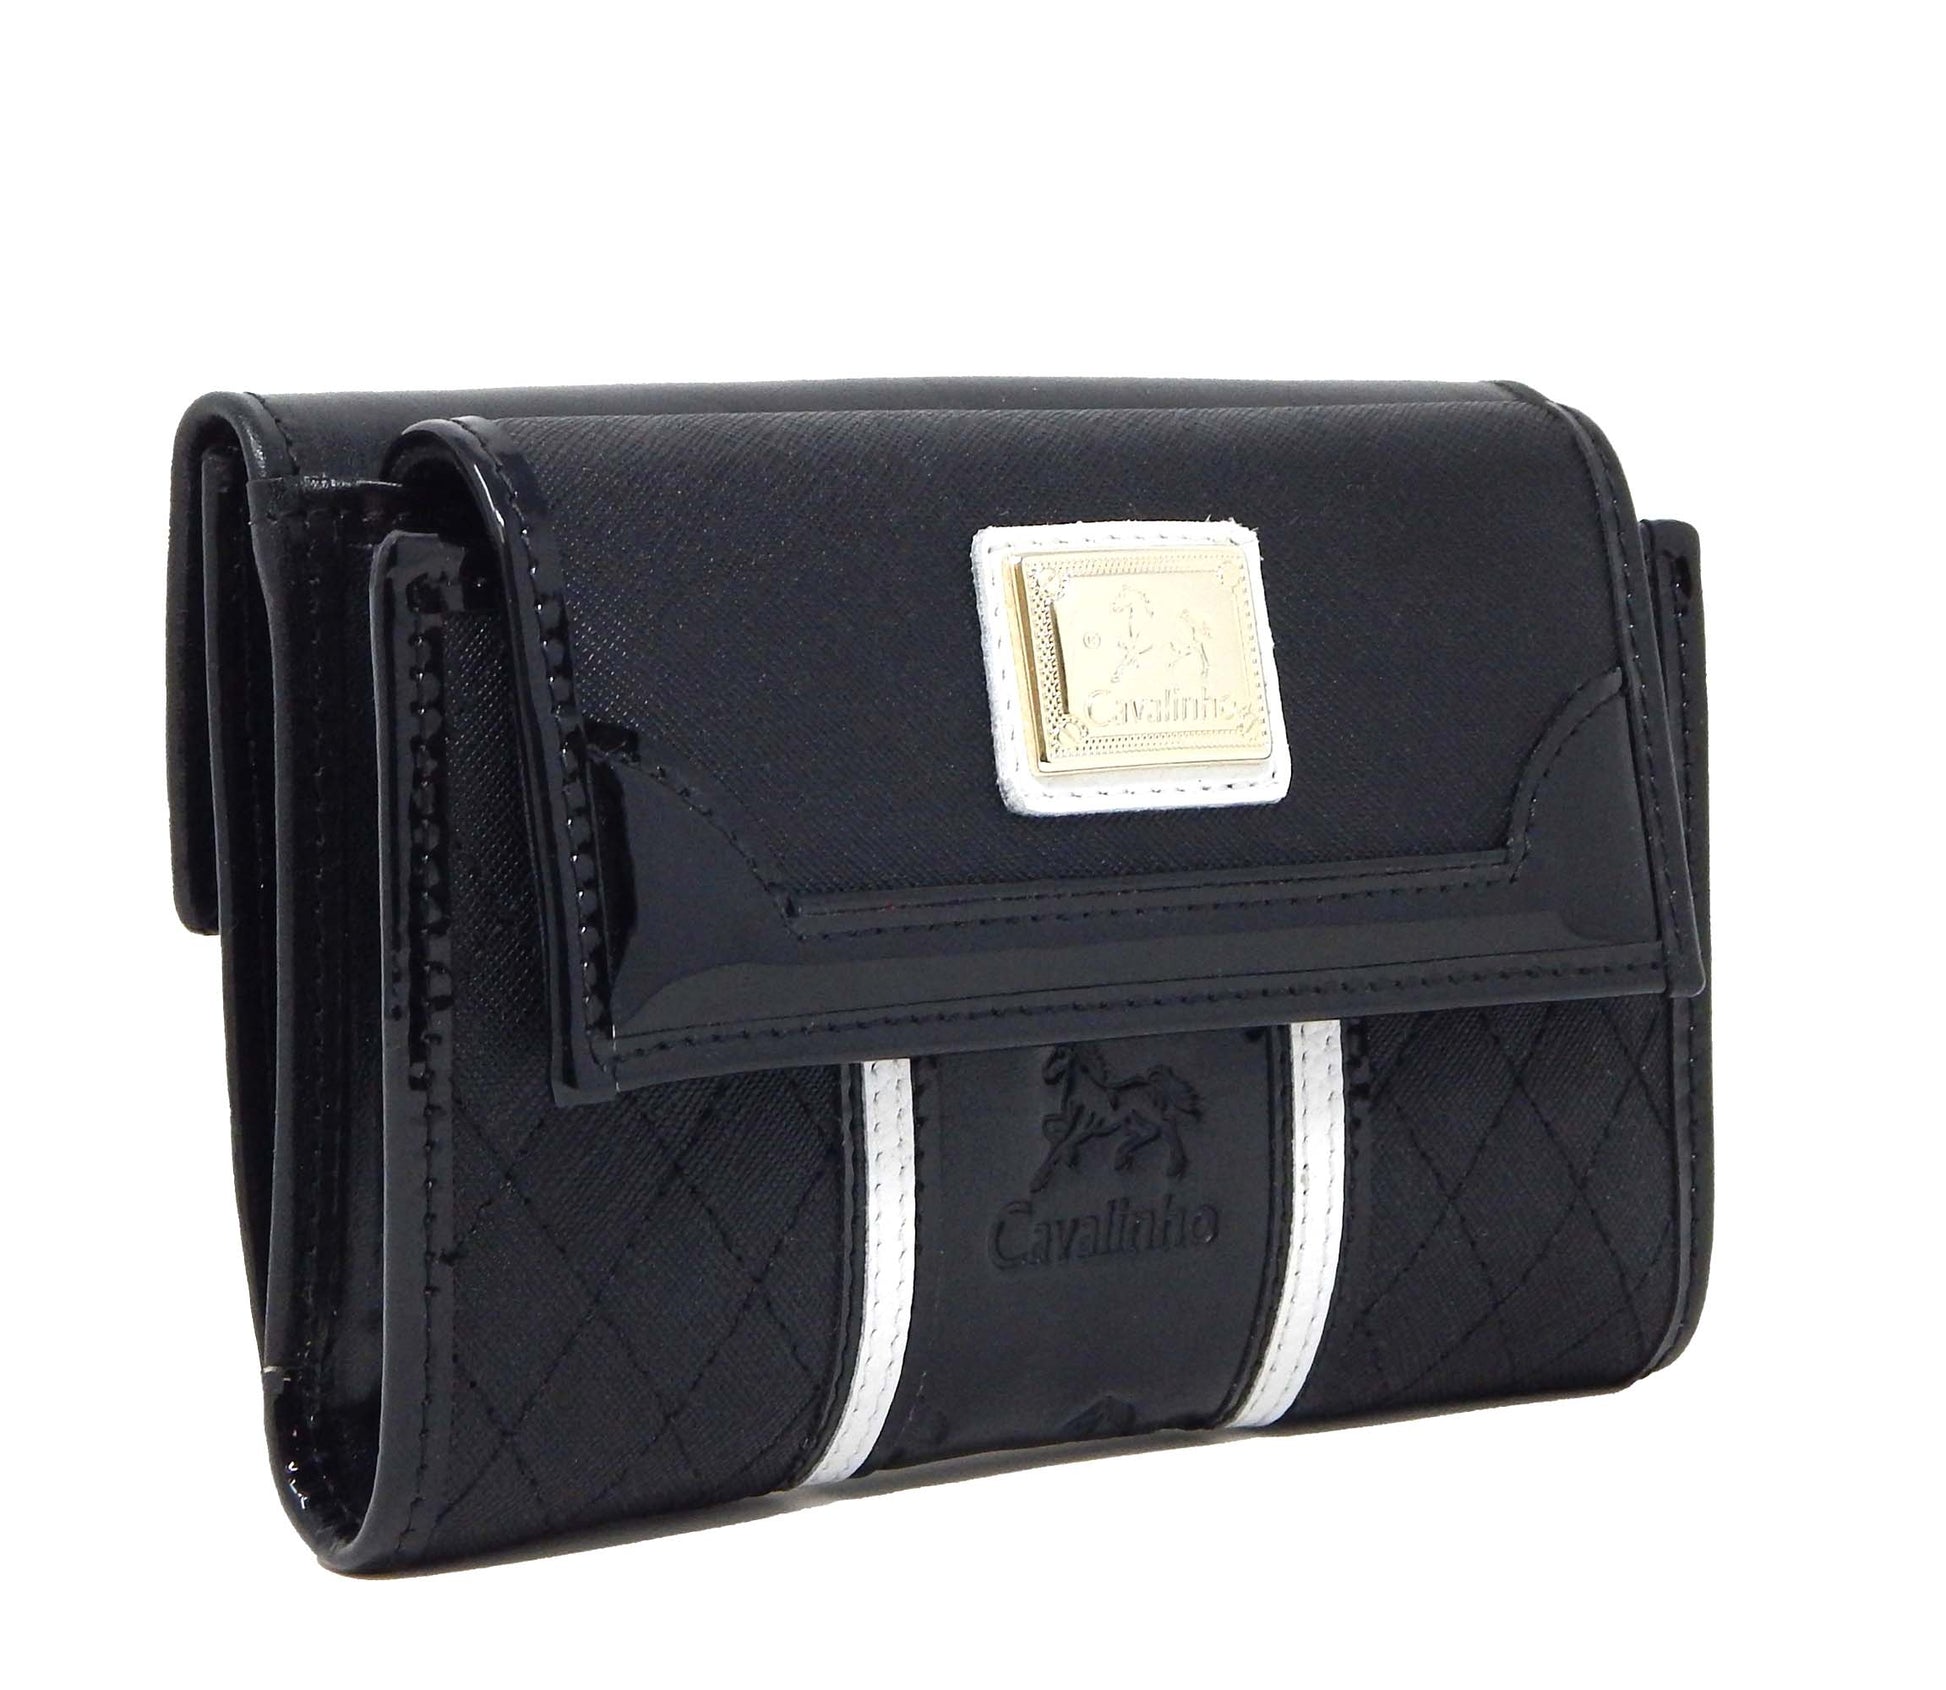 #color_ Black and White | Cavalinho Royal Wallet - Black and White - 28390202.21.99_2